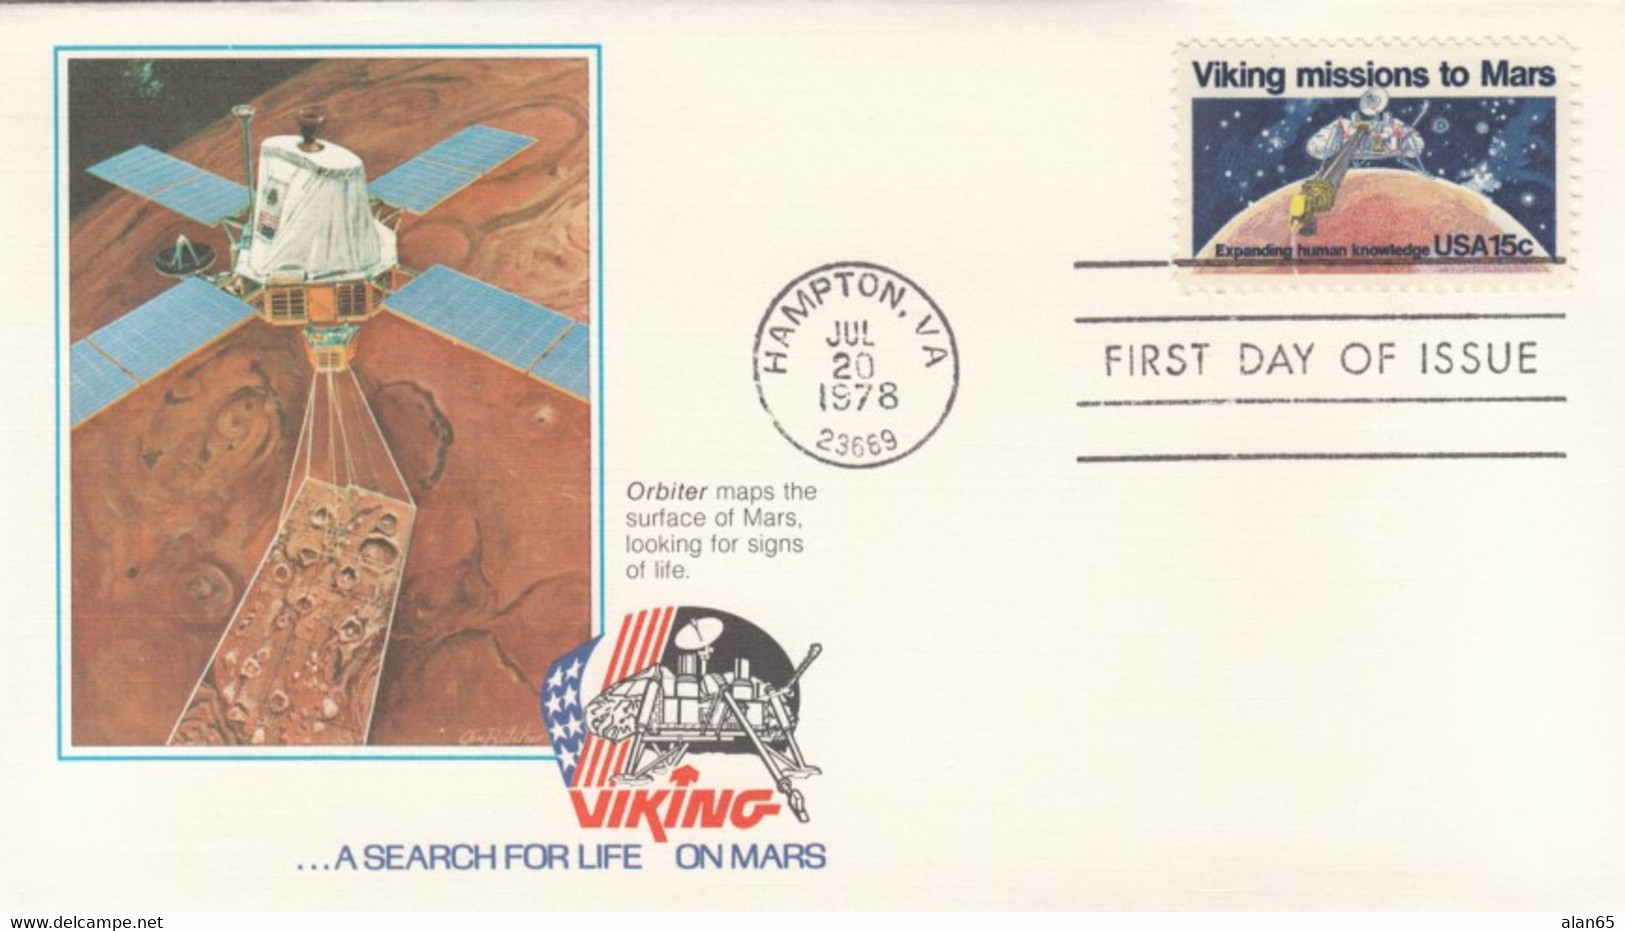 FDC Viking Mission To Mars, US Sc#1759 15c 20 July 1978 Issue, Viking Orbiter Maps Surface Of Mars Image Cachet - América Del Norte